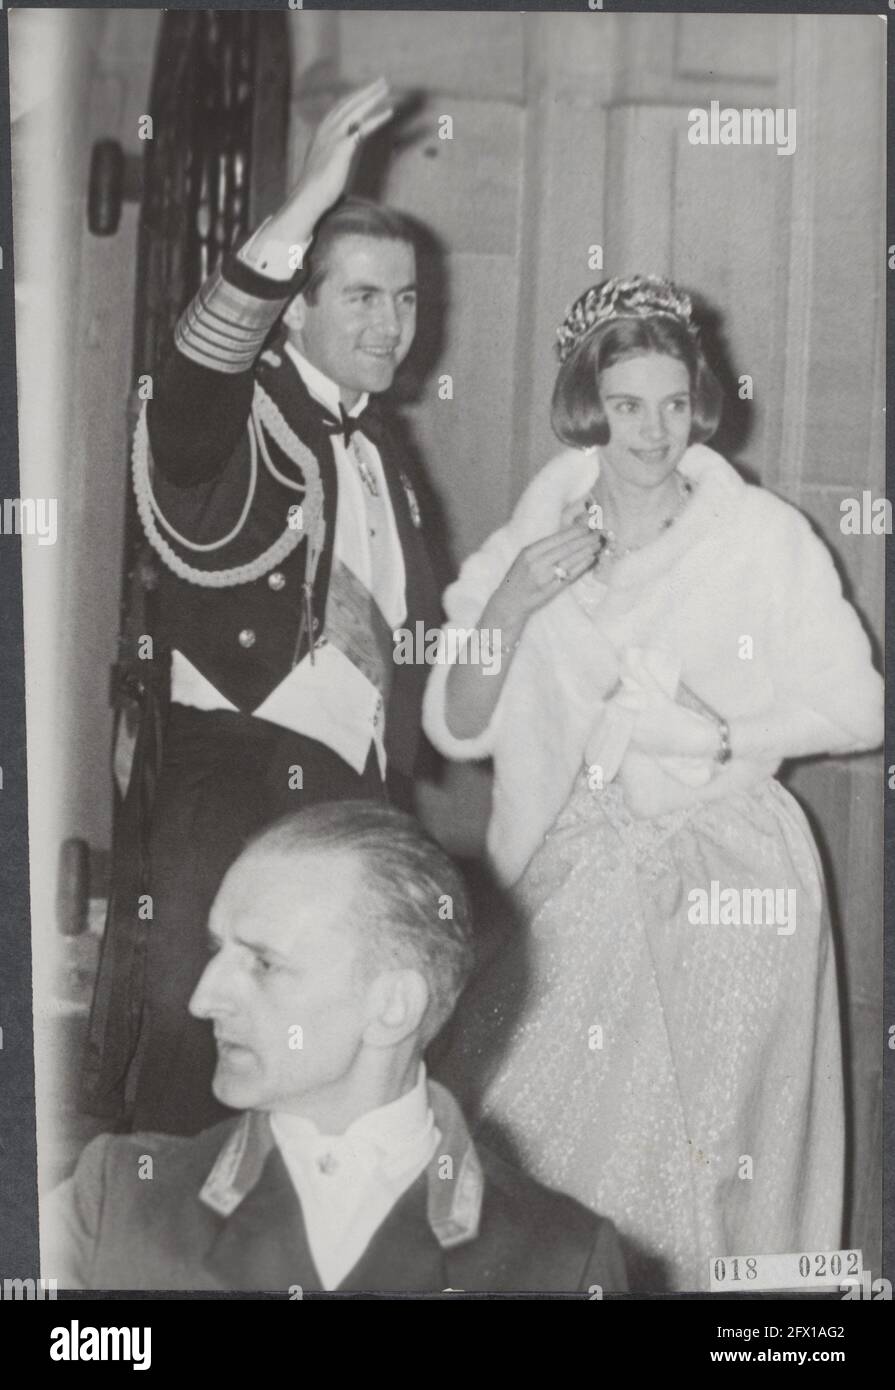 royal house, kings, queens, Constantine king of Greece, Anne-Marie queen of Greece, March 8 1966, kings, queens, royal house, The Netherlands, 20th century press agency photo, news to remember, documentary, historic photography 1945-1990, visual stories, human history of the Twentieth Century, capturing moments in time Stock Photo